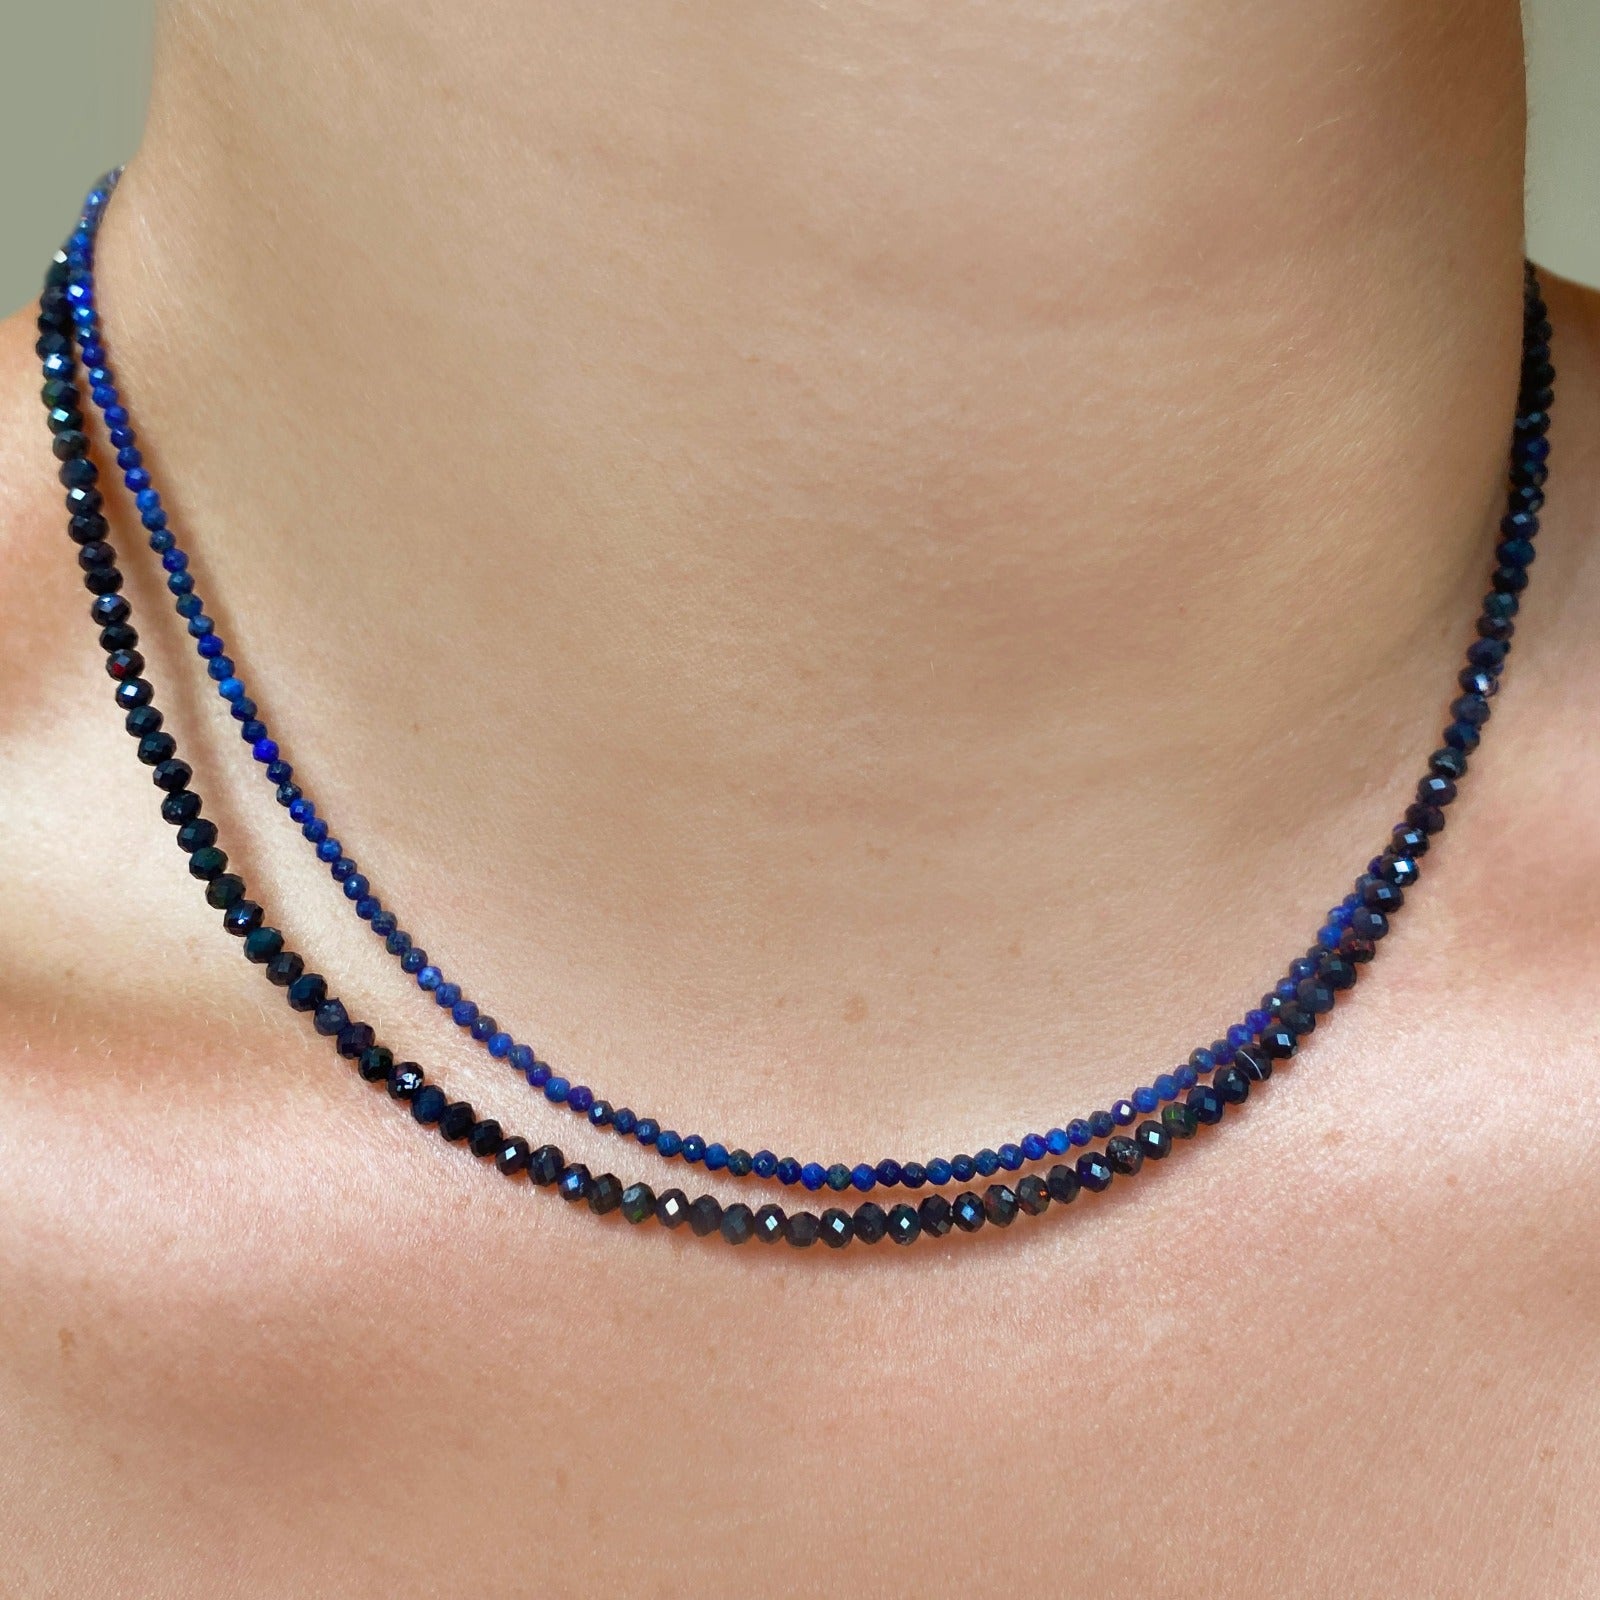 Shimmering beaded necklace made of 2.5mm faceted opals in shades of black on a gold linking lobster clasp. Styled with a navy blue 2.5mm faceted opal necklace on a gold linking ovals clasp.